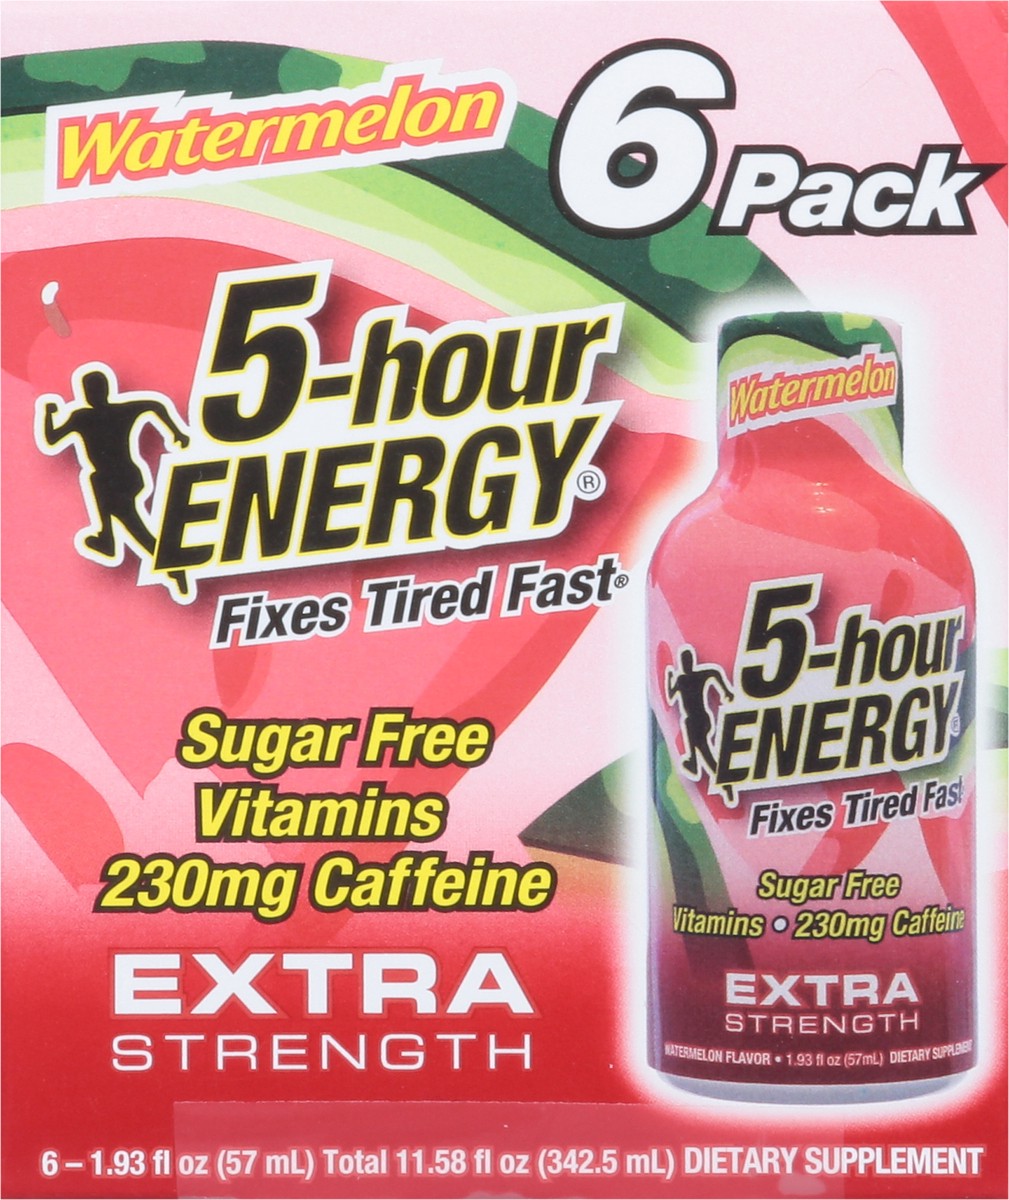 slide 15 of 15, 5-hour ENERGY 5-Hour Watermelon Extra Strength 6-pack, 6 ct